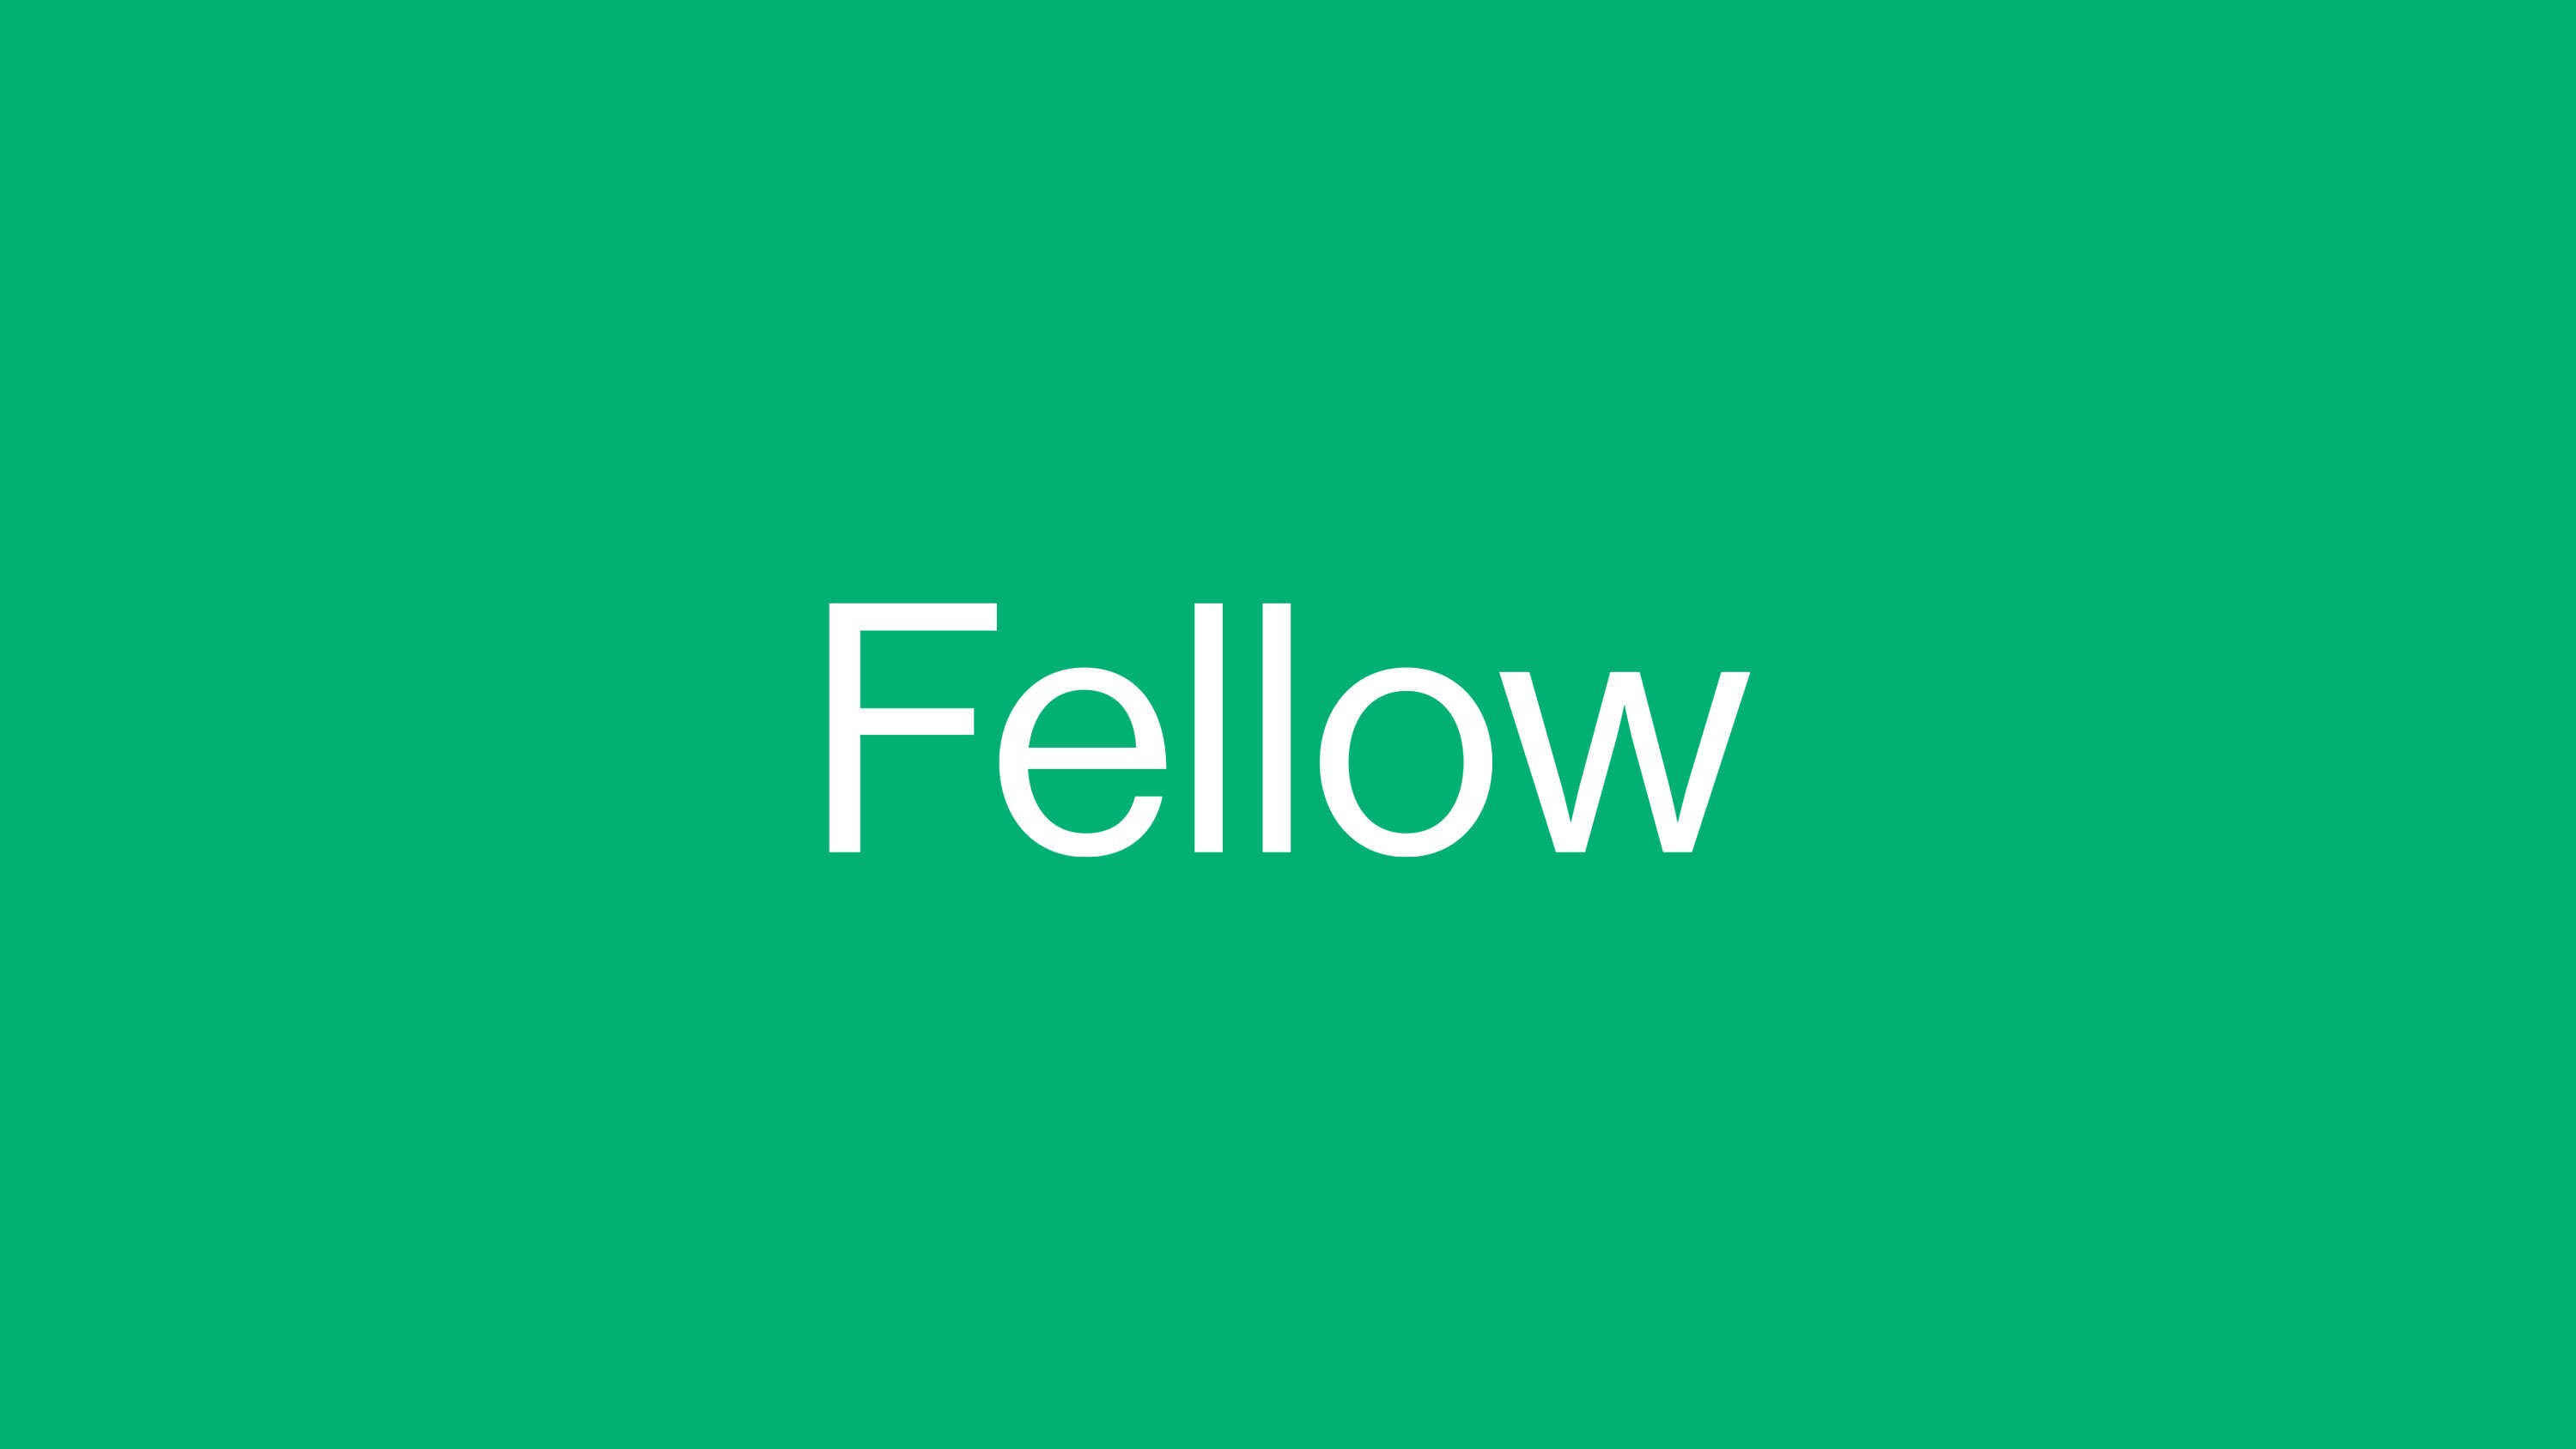 Fellow logo in white on green background, designed by RoAndCo